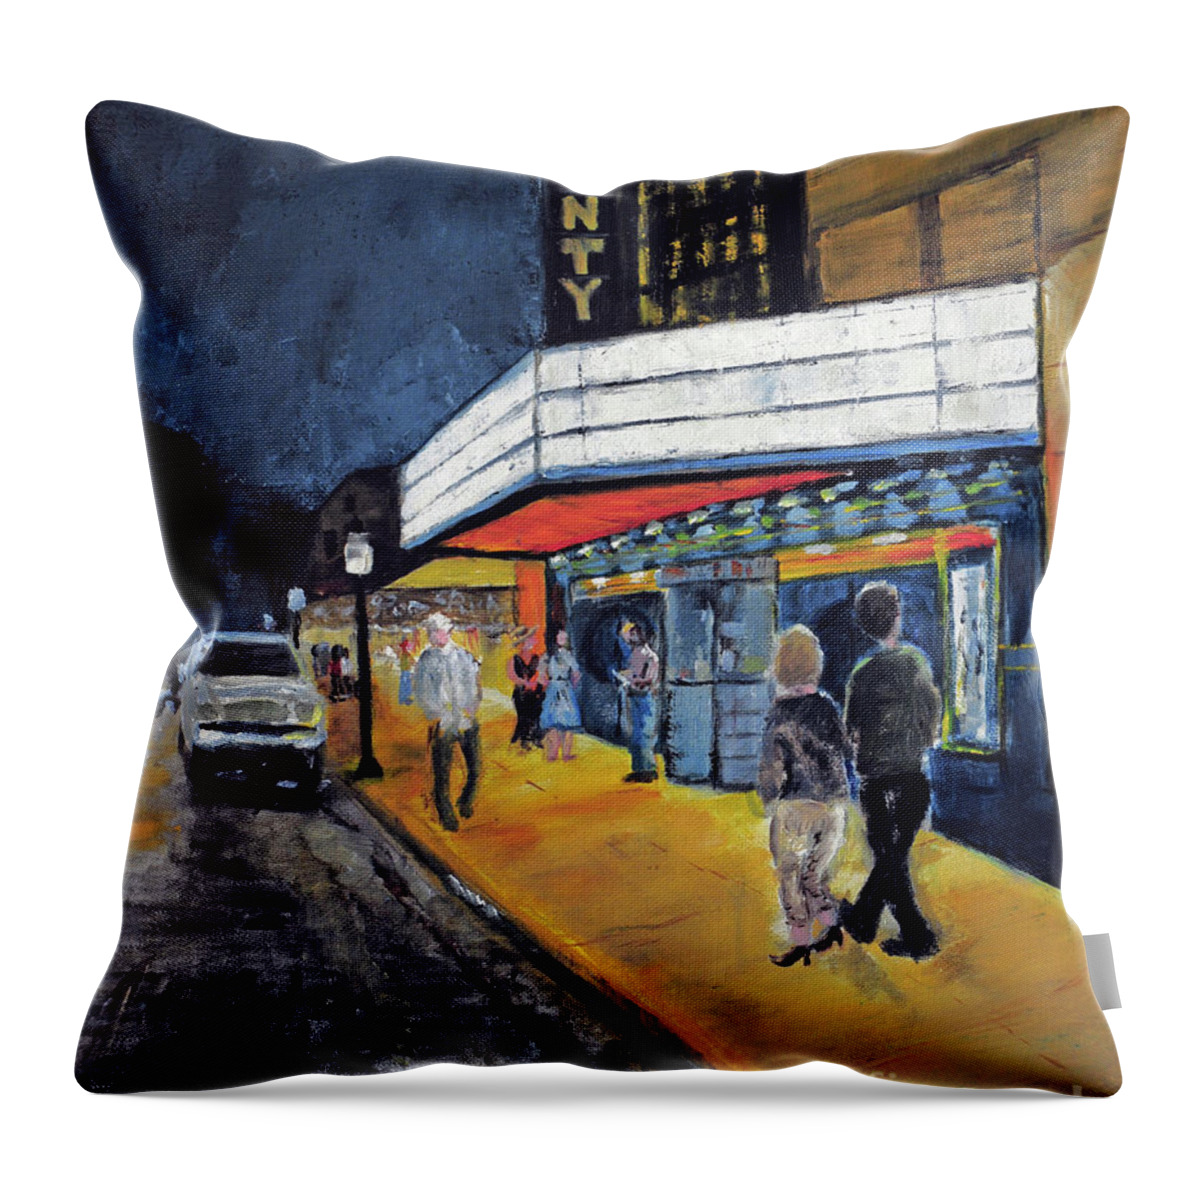 County Theater Throw Pillow featuring the painting County Theater by Paint Box Studio